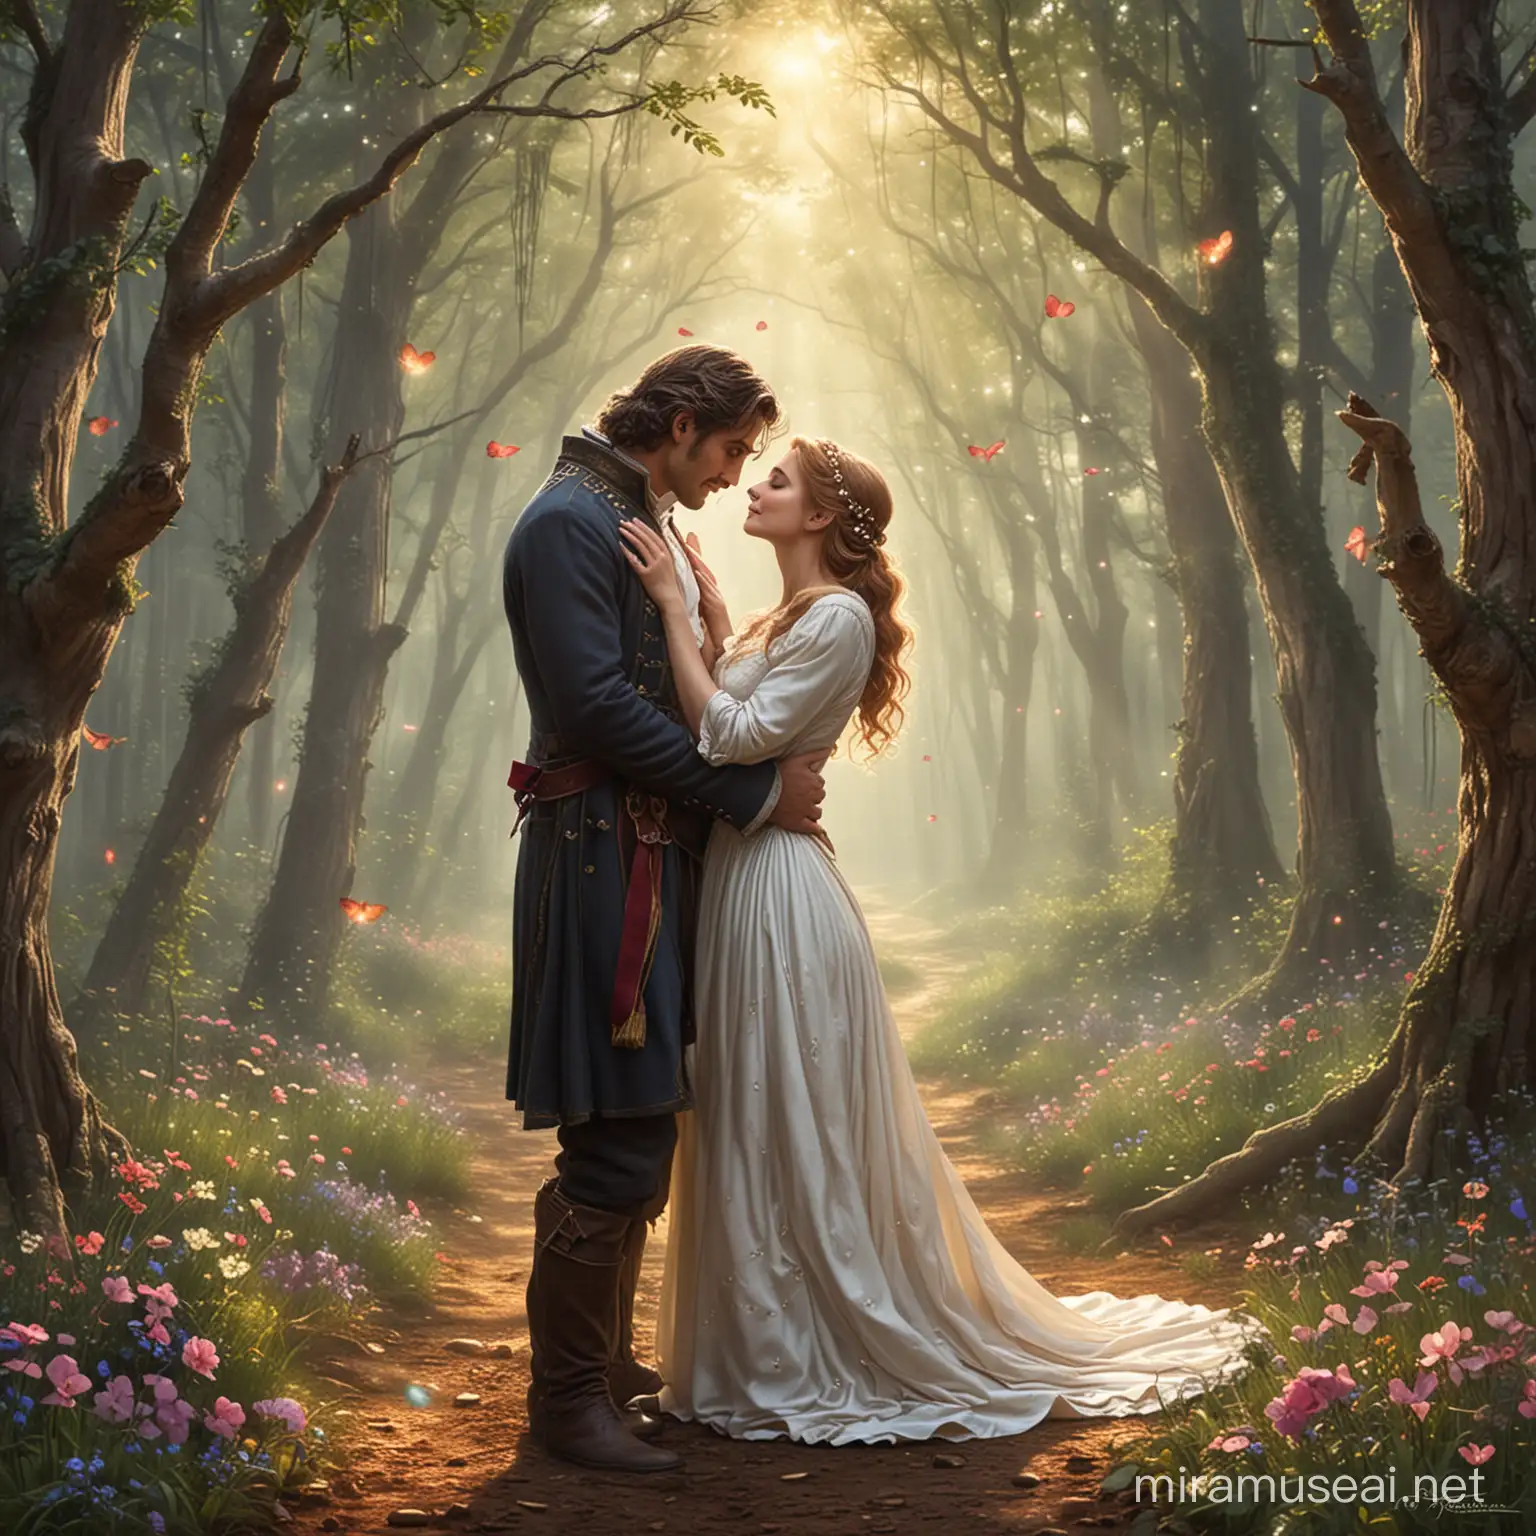 Enchanted Lovers Embracing in a Mystical Forest